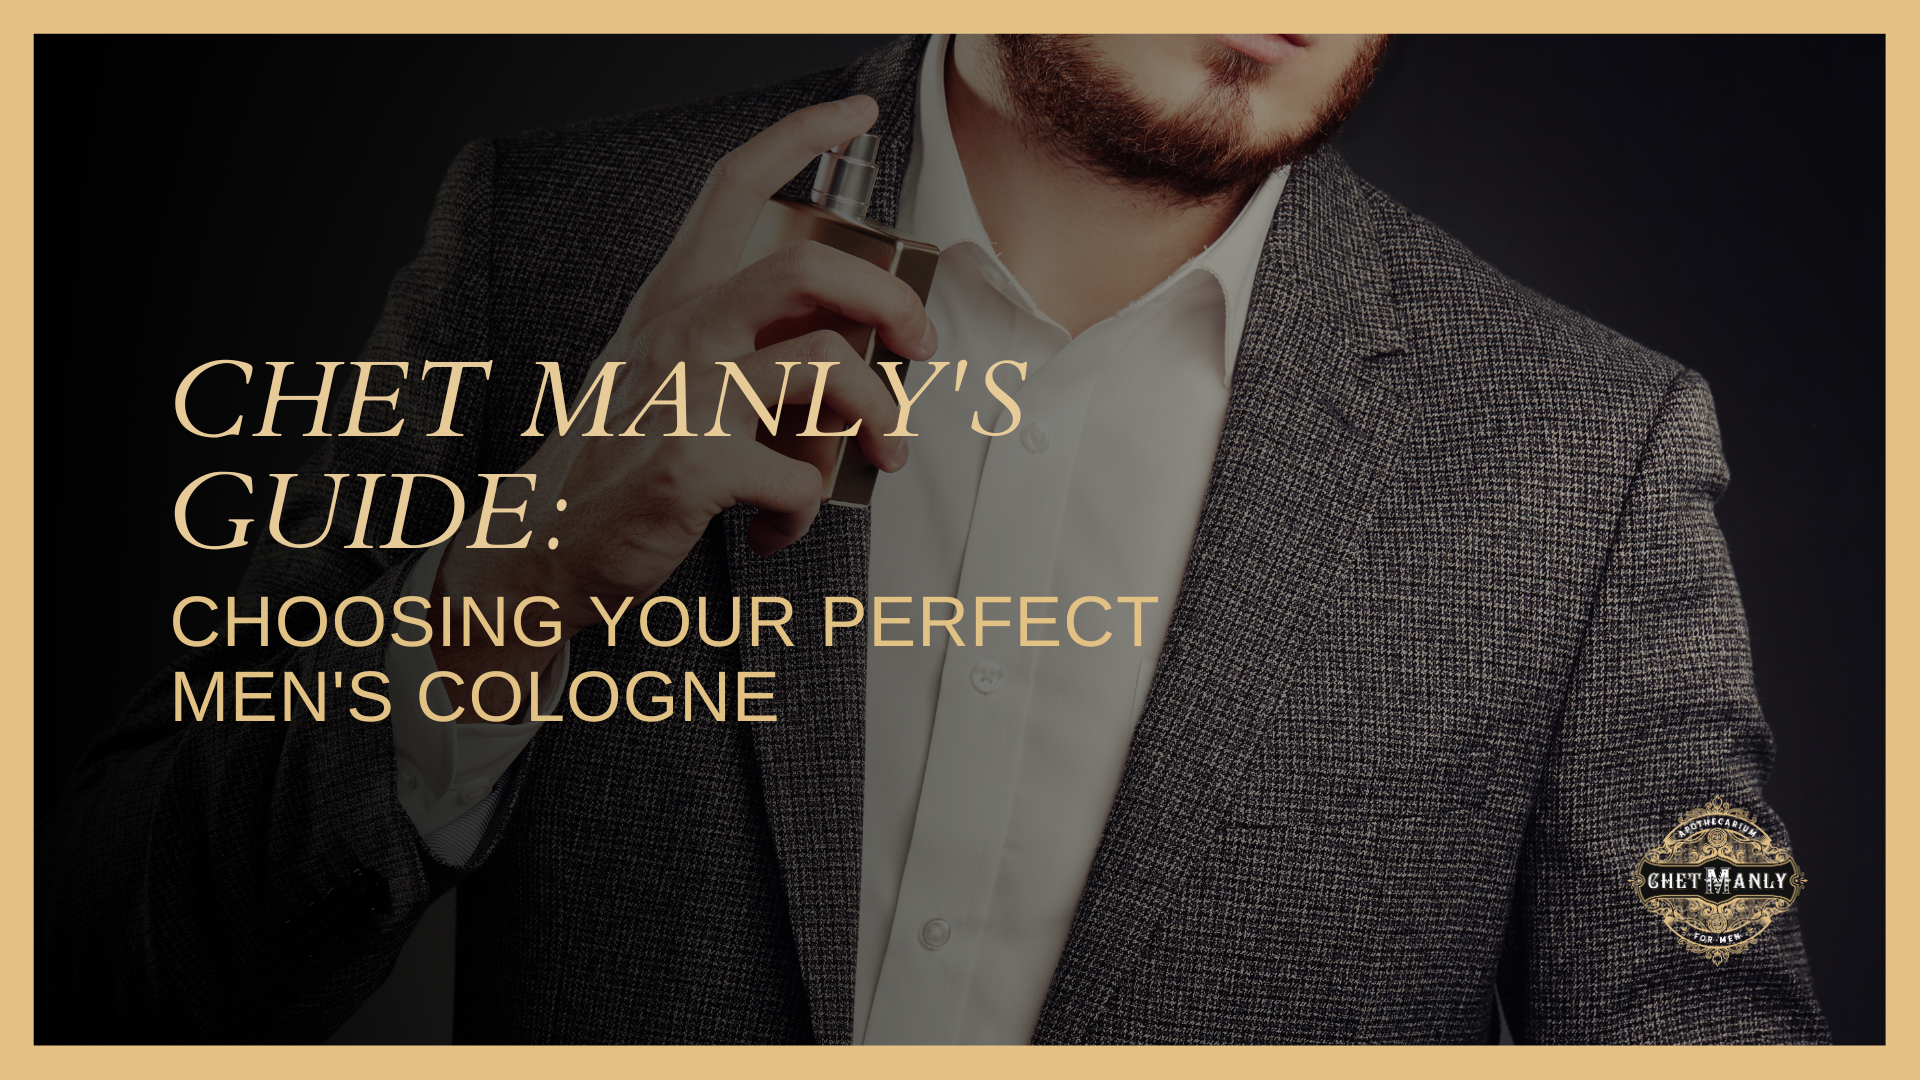 Chet Manly's Guide: Choosing Your Perfect Men's Cologne